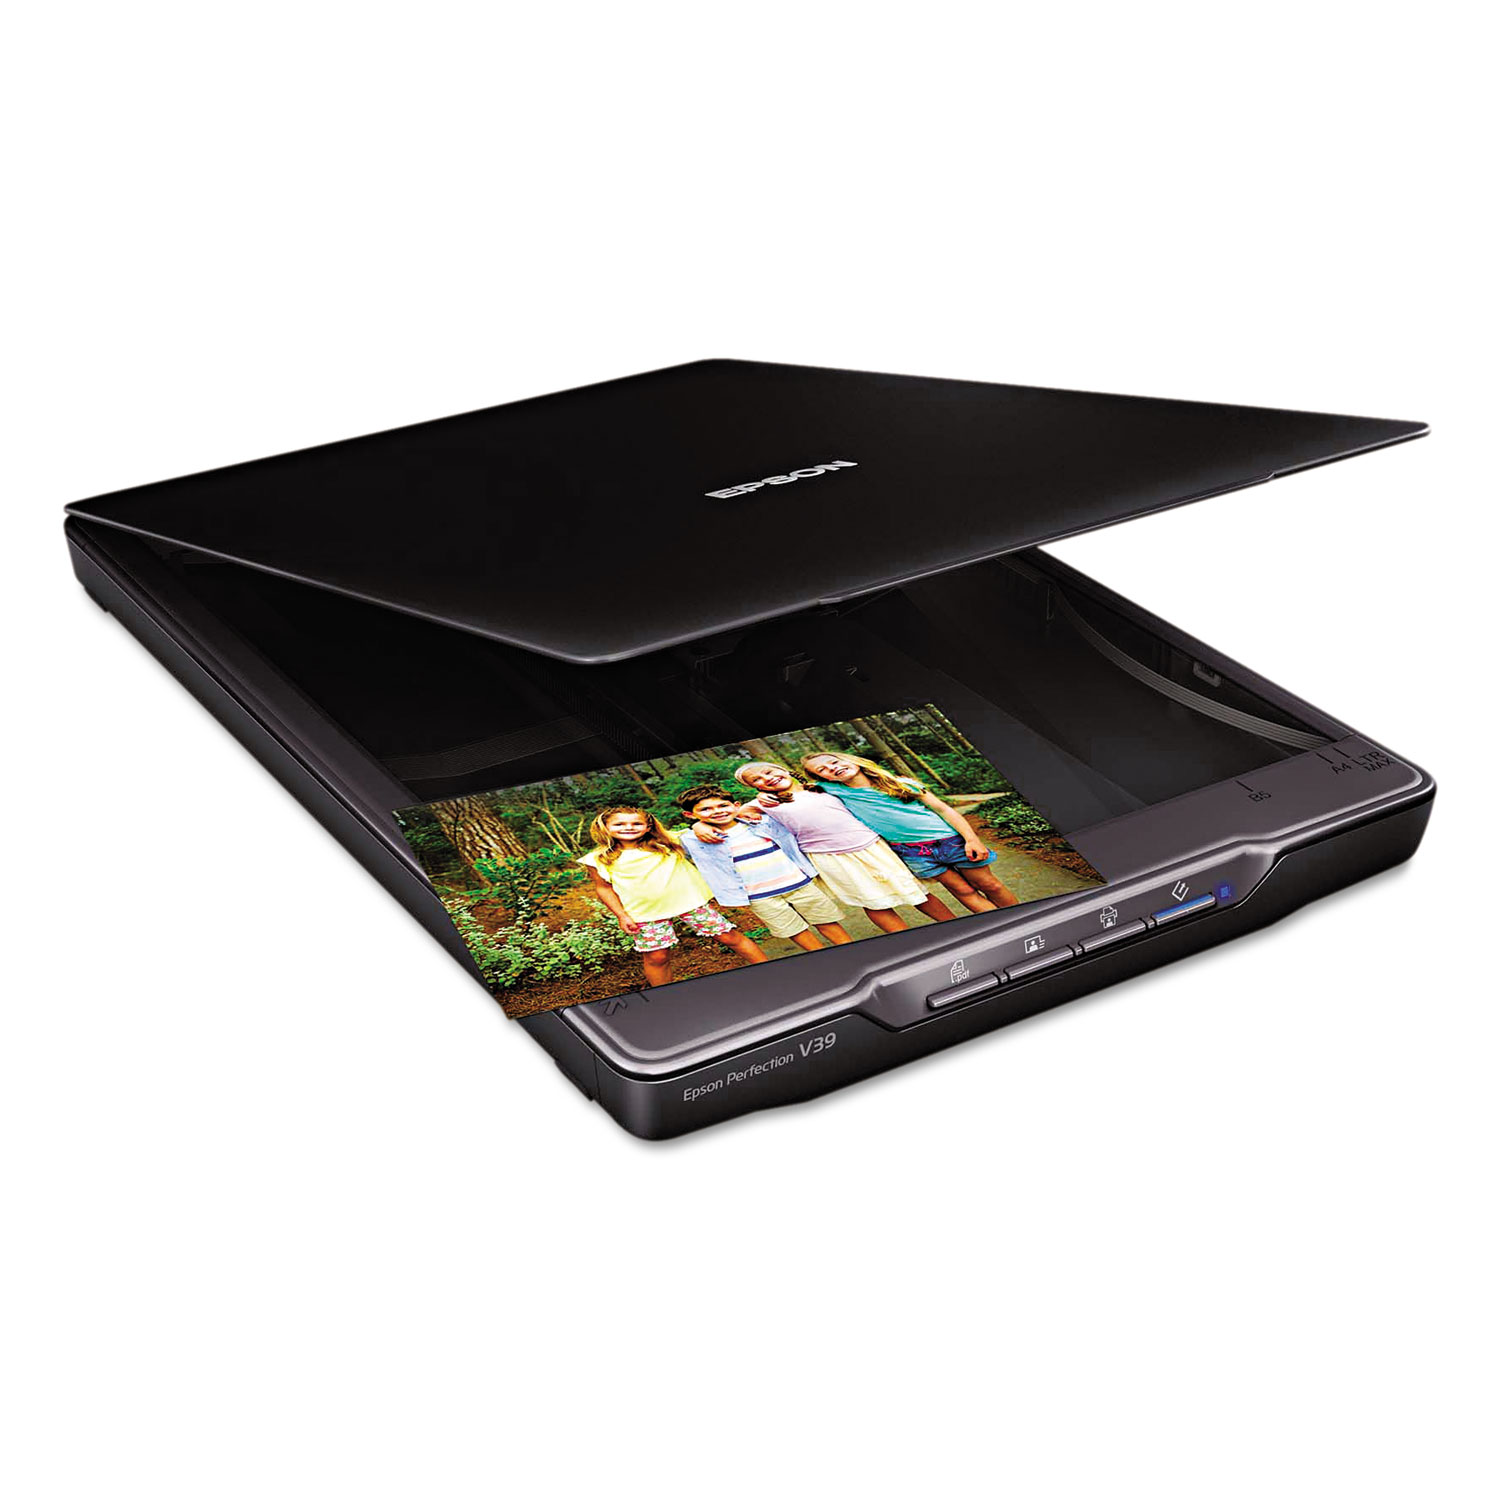 Perfection V39 Color Photo and Document Scanner, 4800 x 4800 dpi, Black